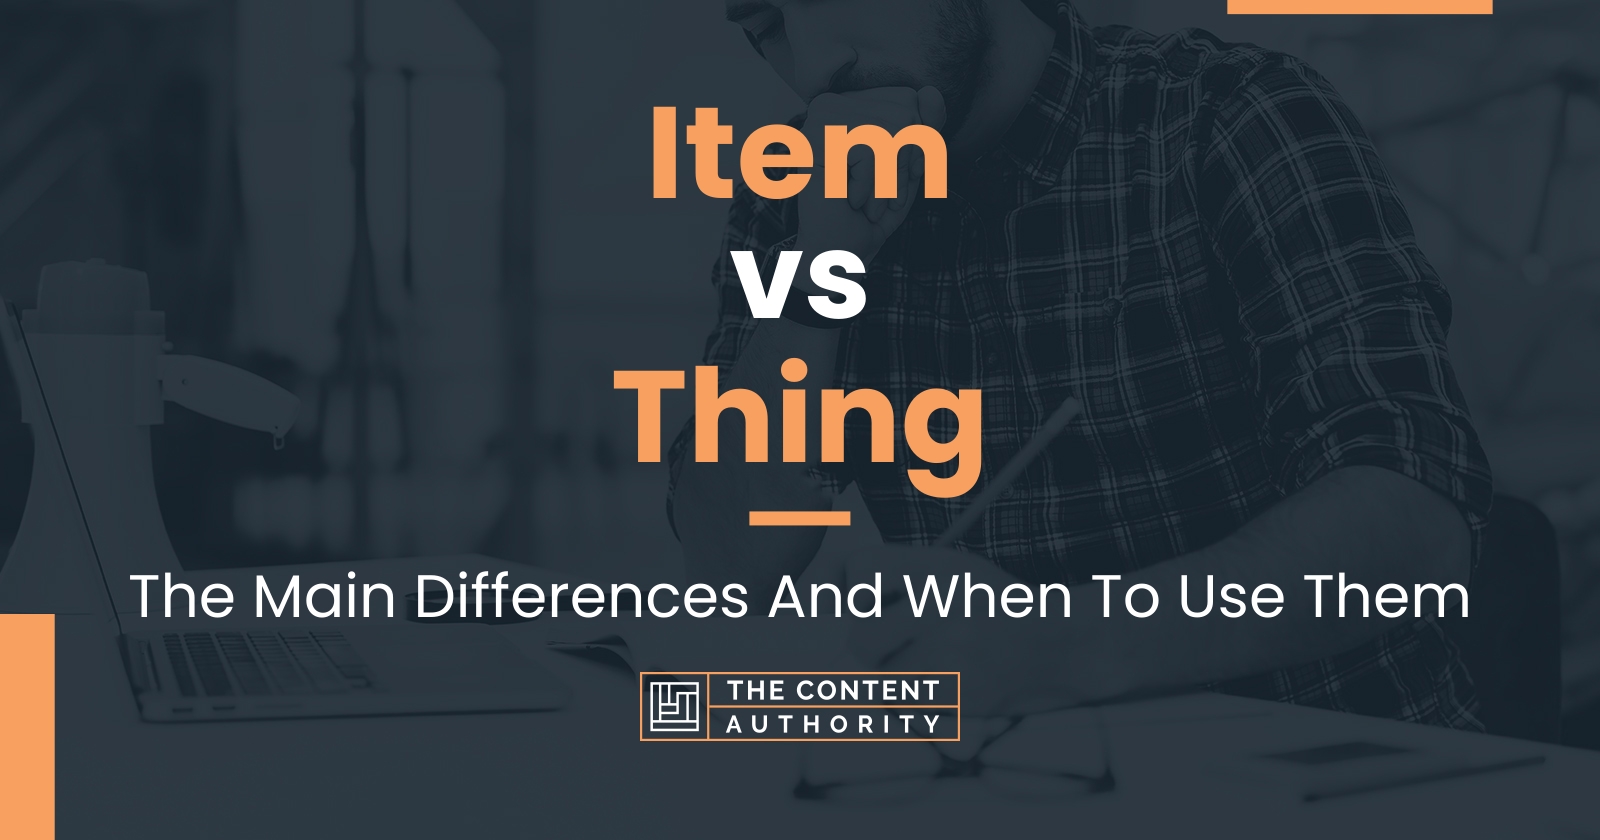 Item vs Thing: The Main Differences And When To Use Them